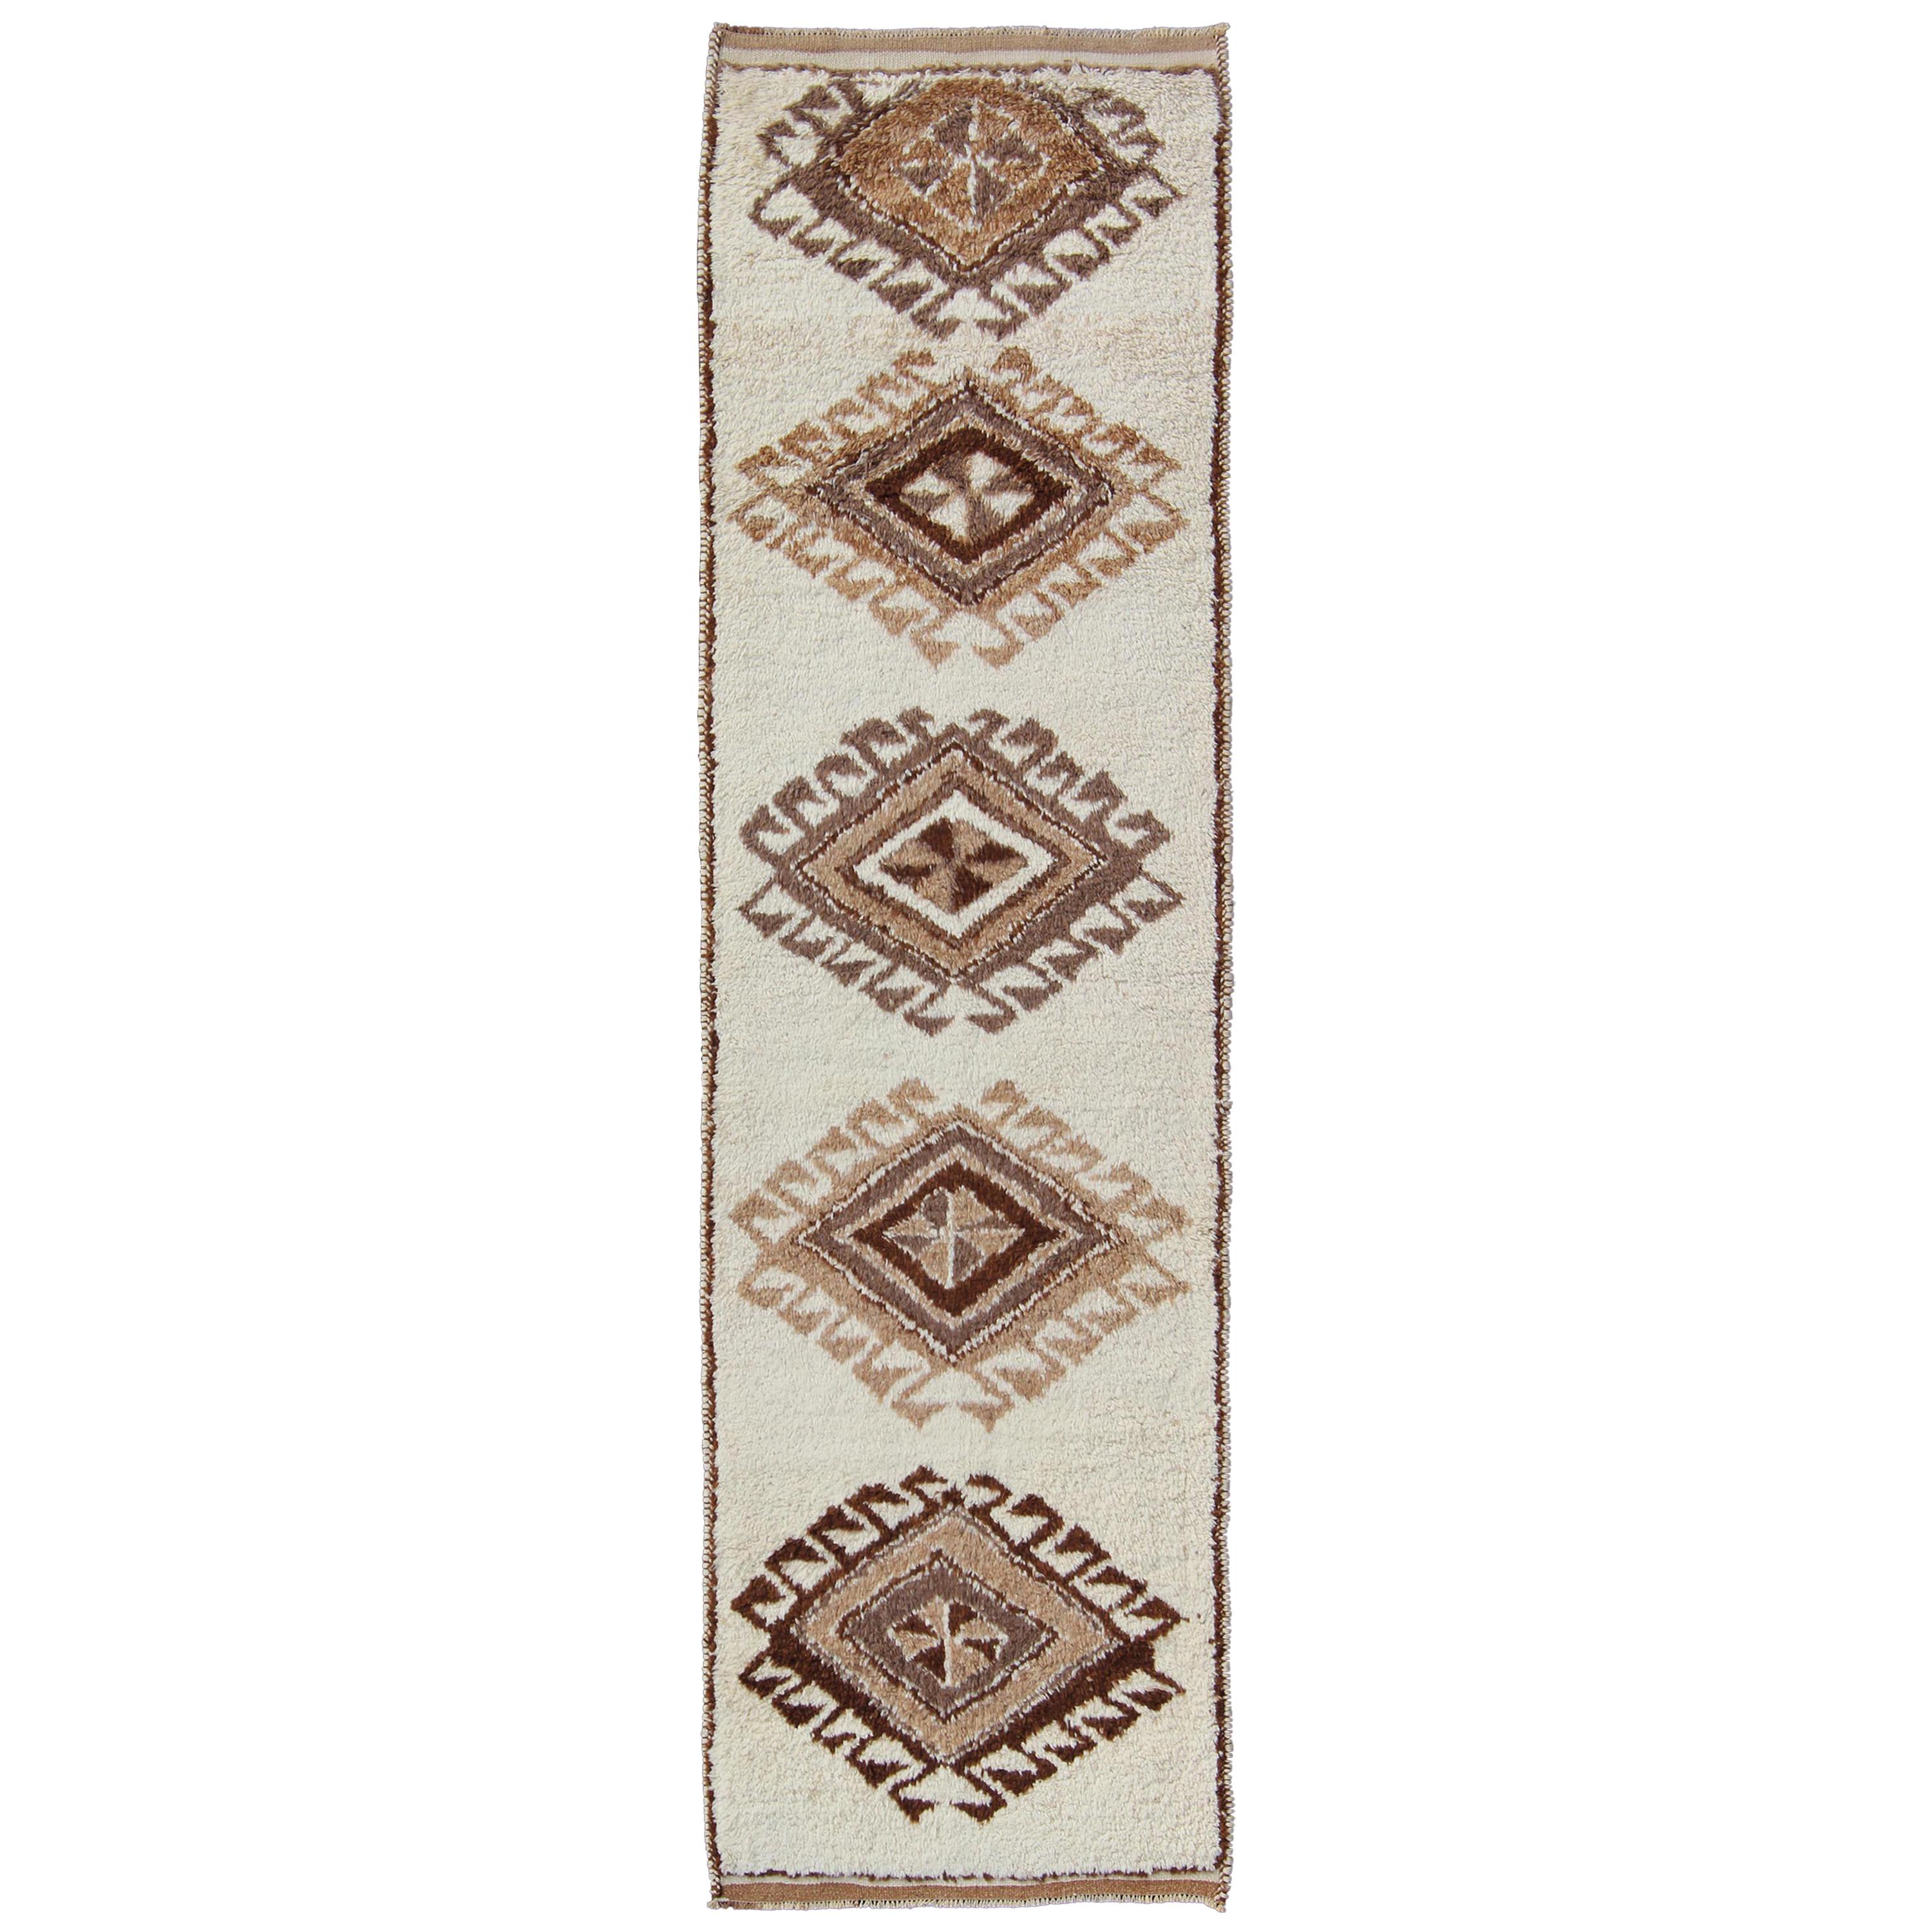 Vintage Turkish Tulu Gallery Rug with Tribal Diamond Design in Cream and Brown For Sale